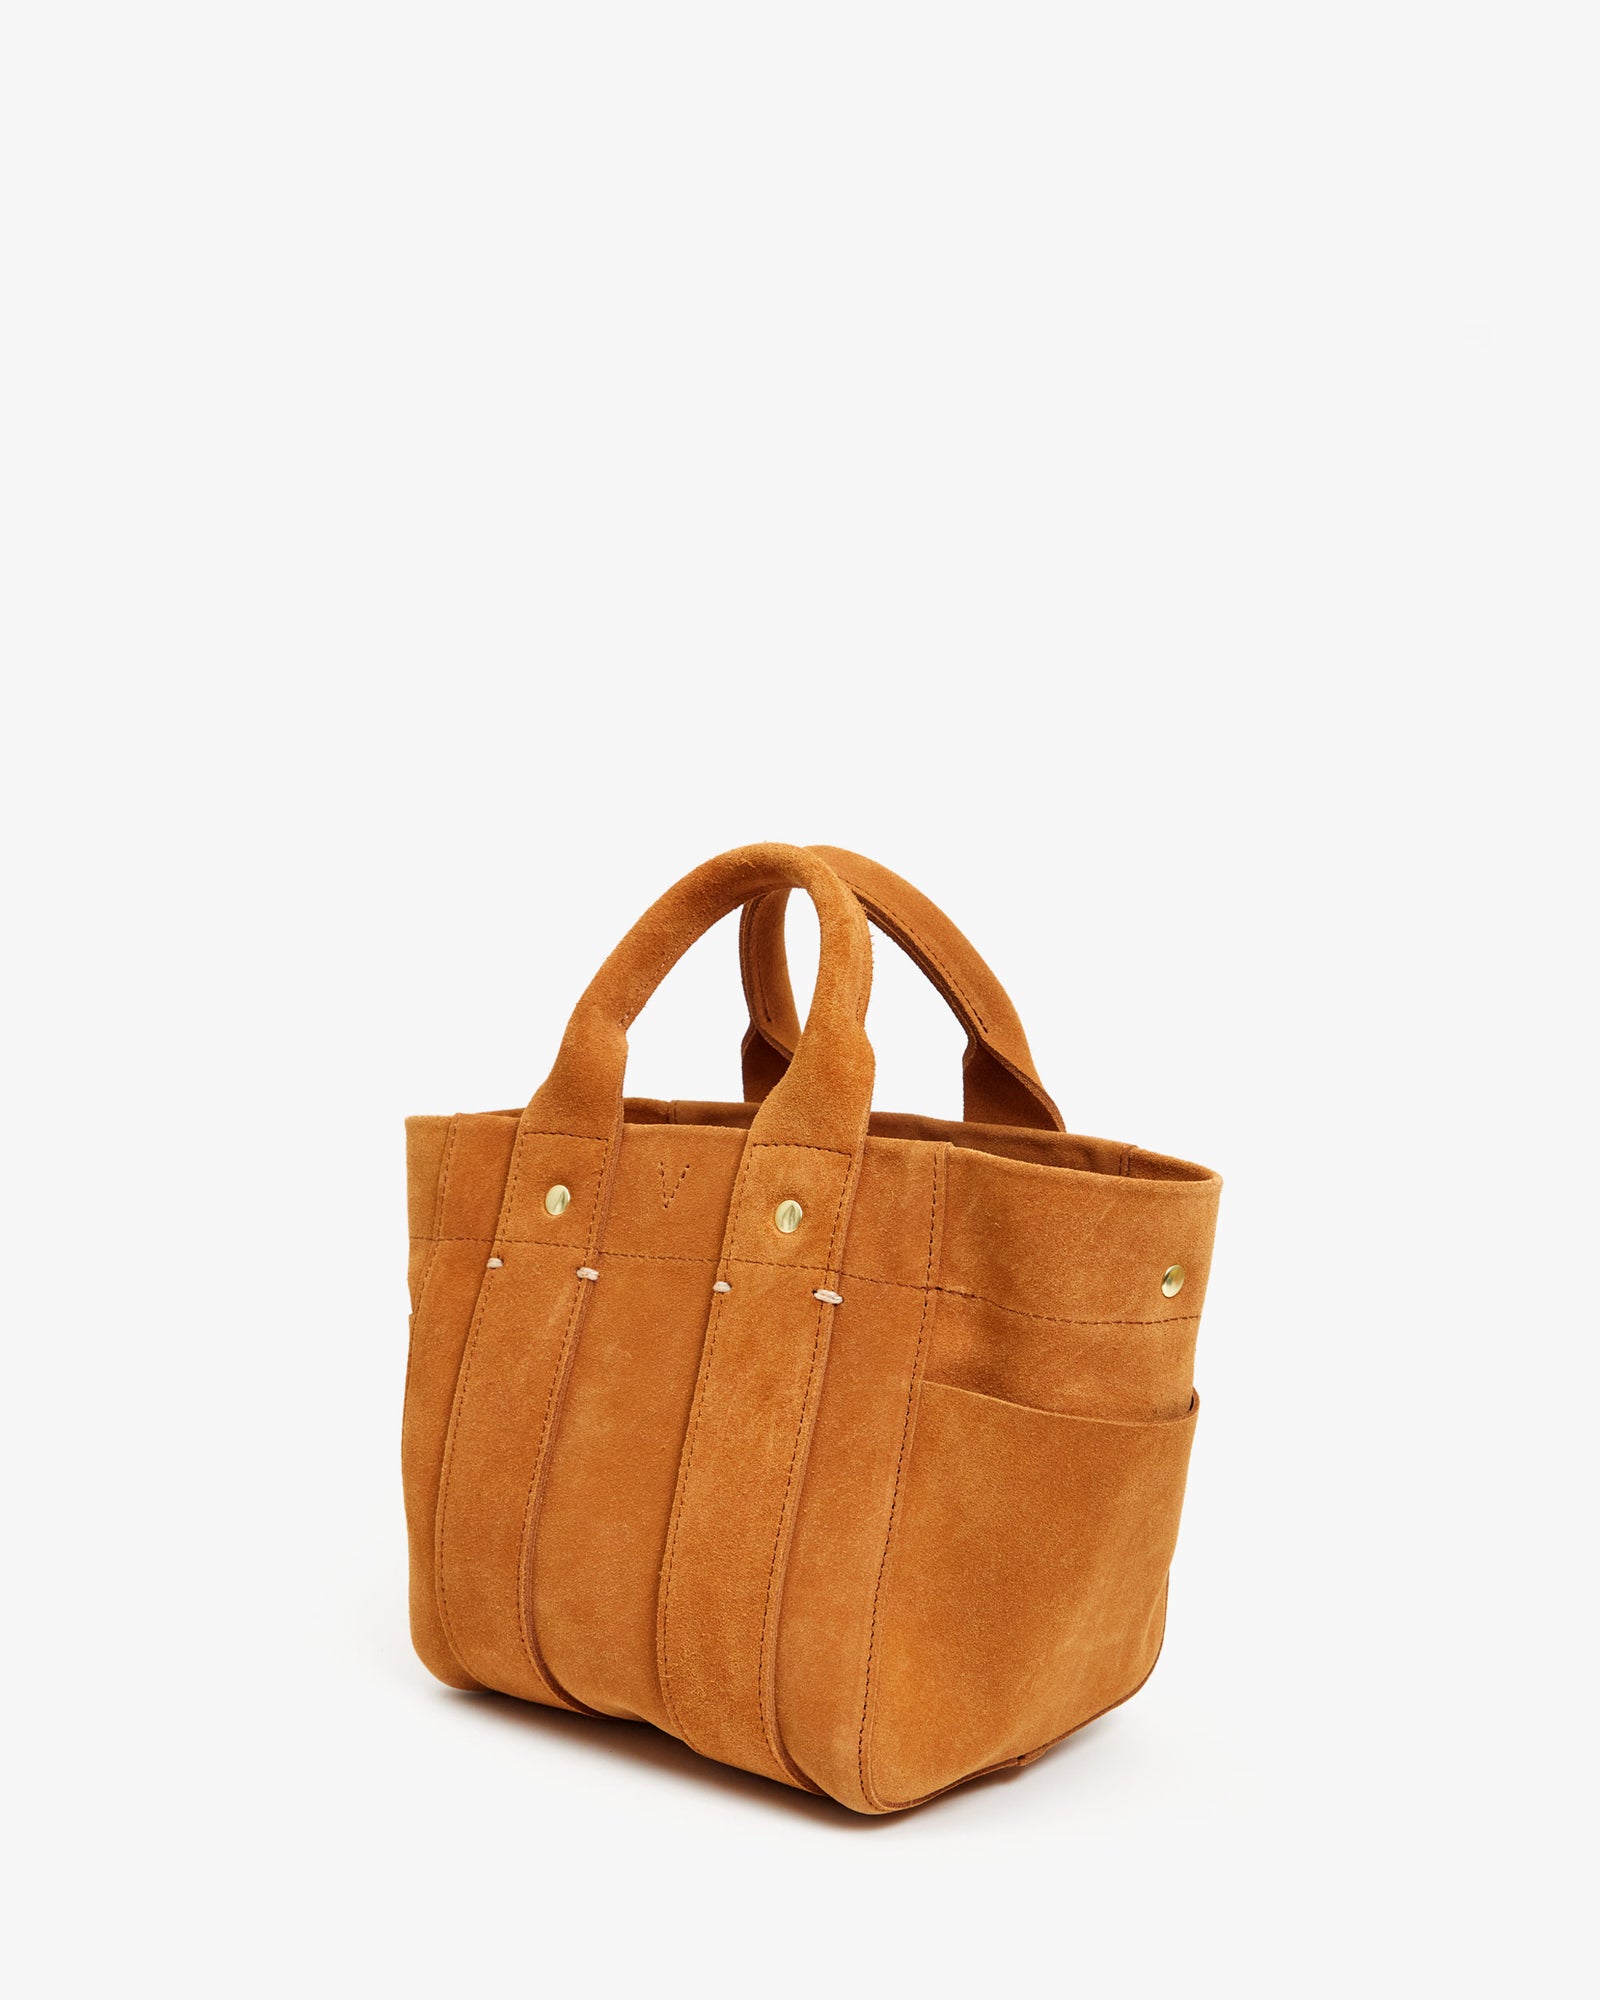 Clare V. Le Petit Box Tote in Chocolate Suede